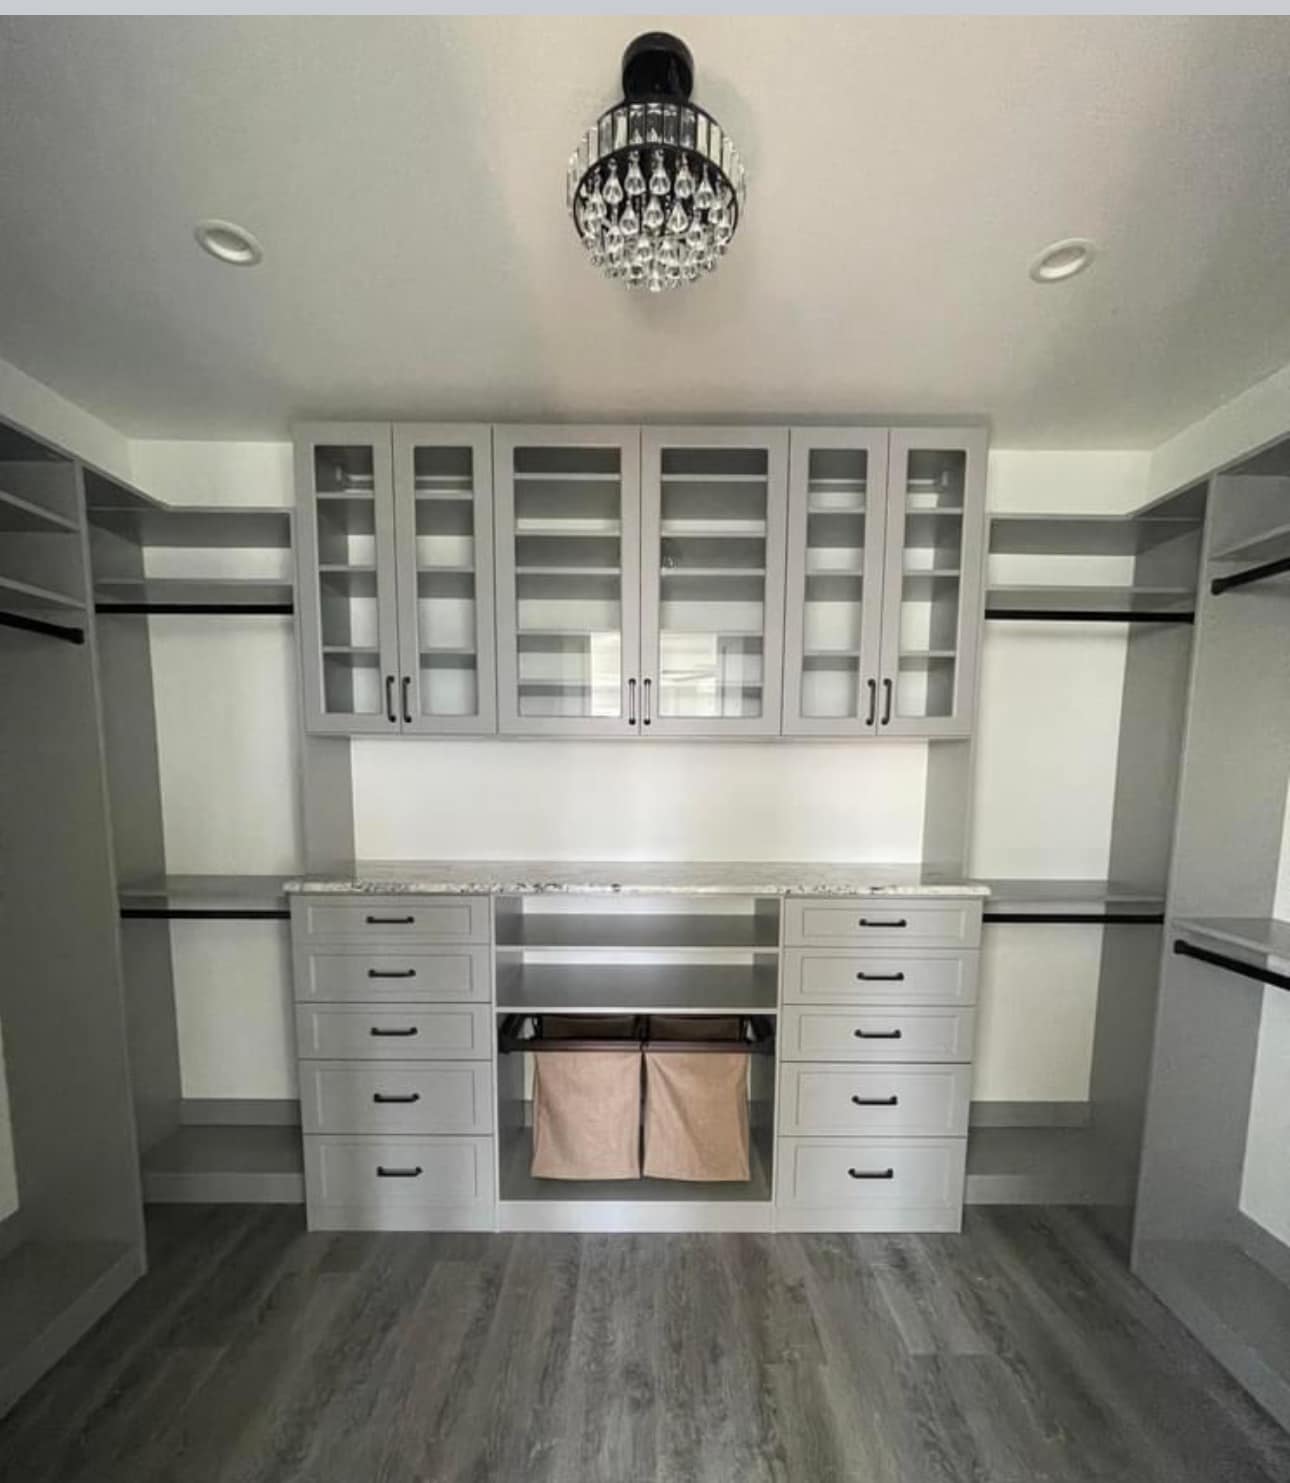 Dual-level of closet organization with a chest of parallel drawers on the bottom and glass-in shelving on top.